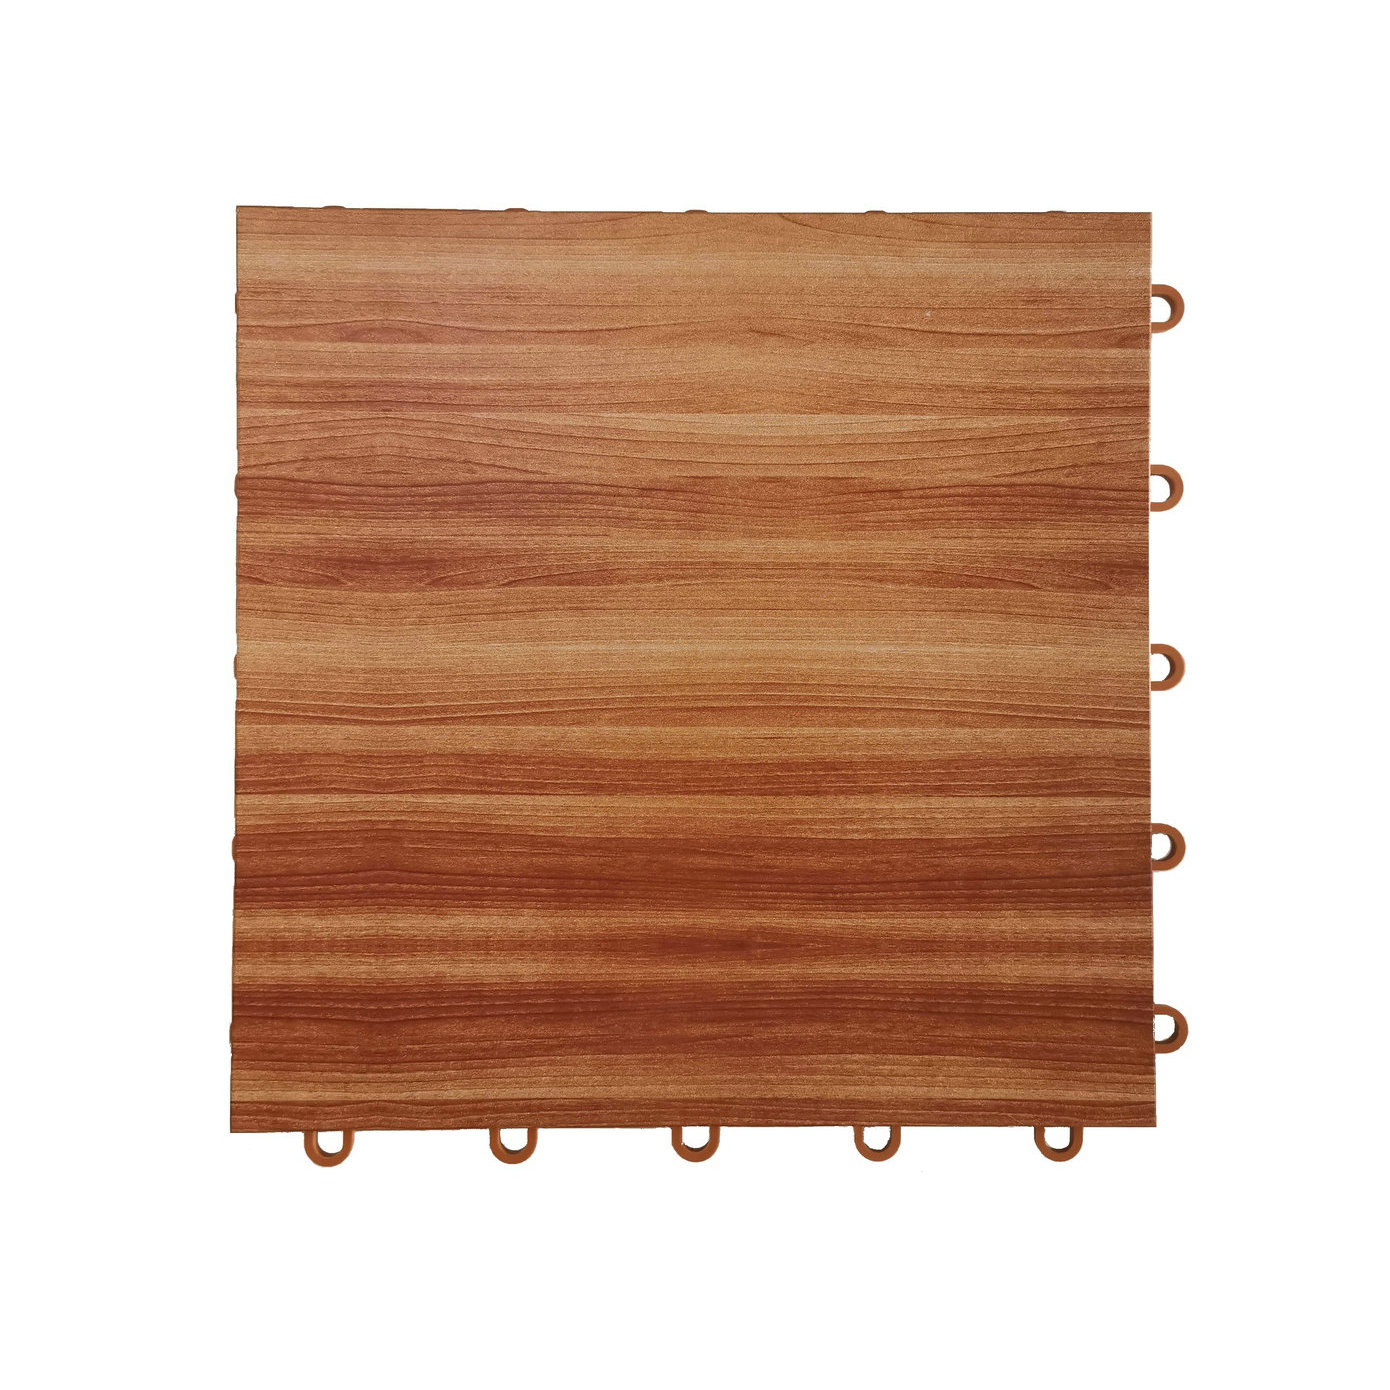 Wood Model Grain Interlocking Tile With Easy Installation Featured Image